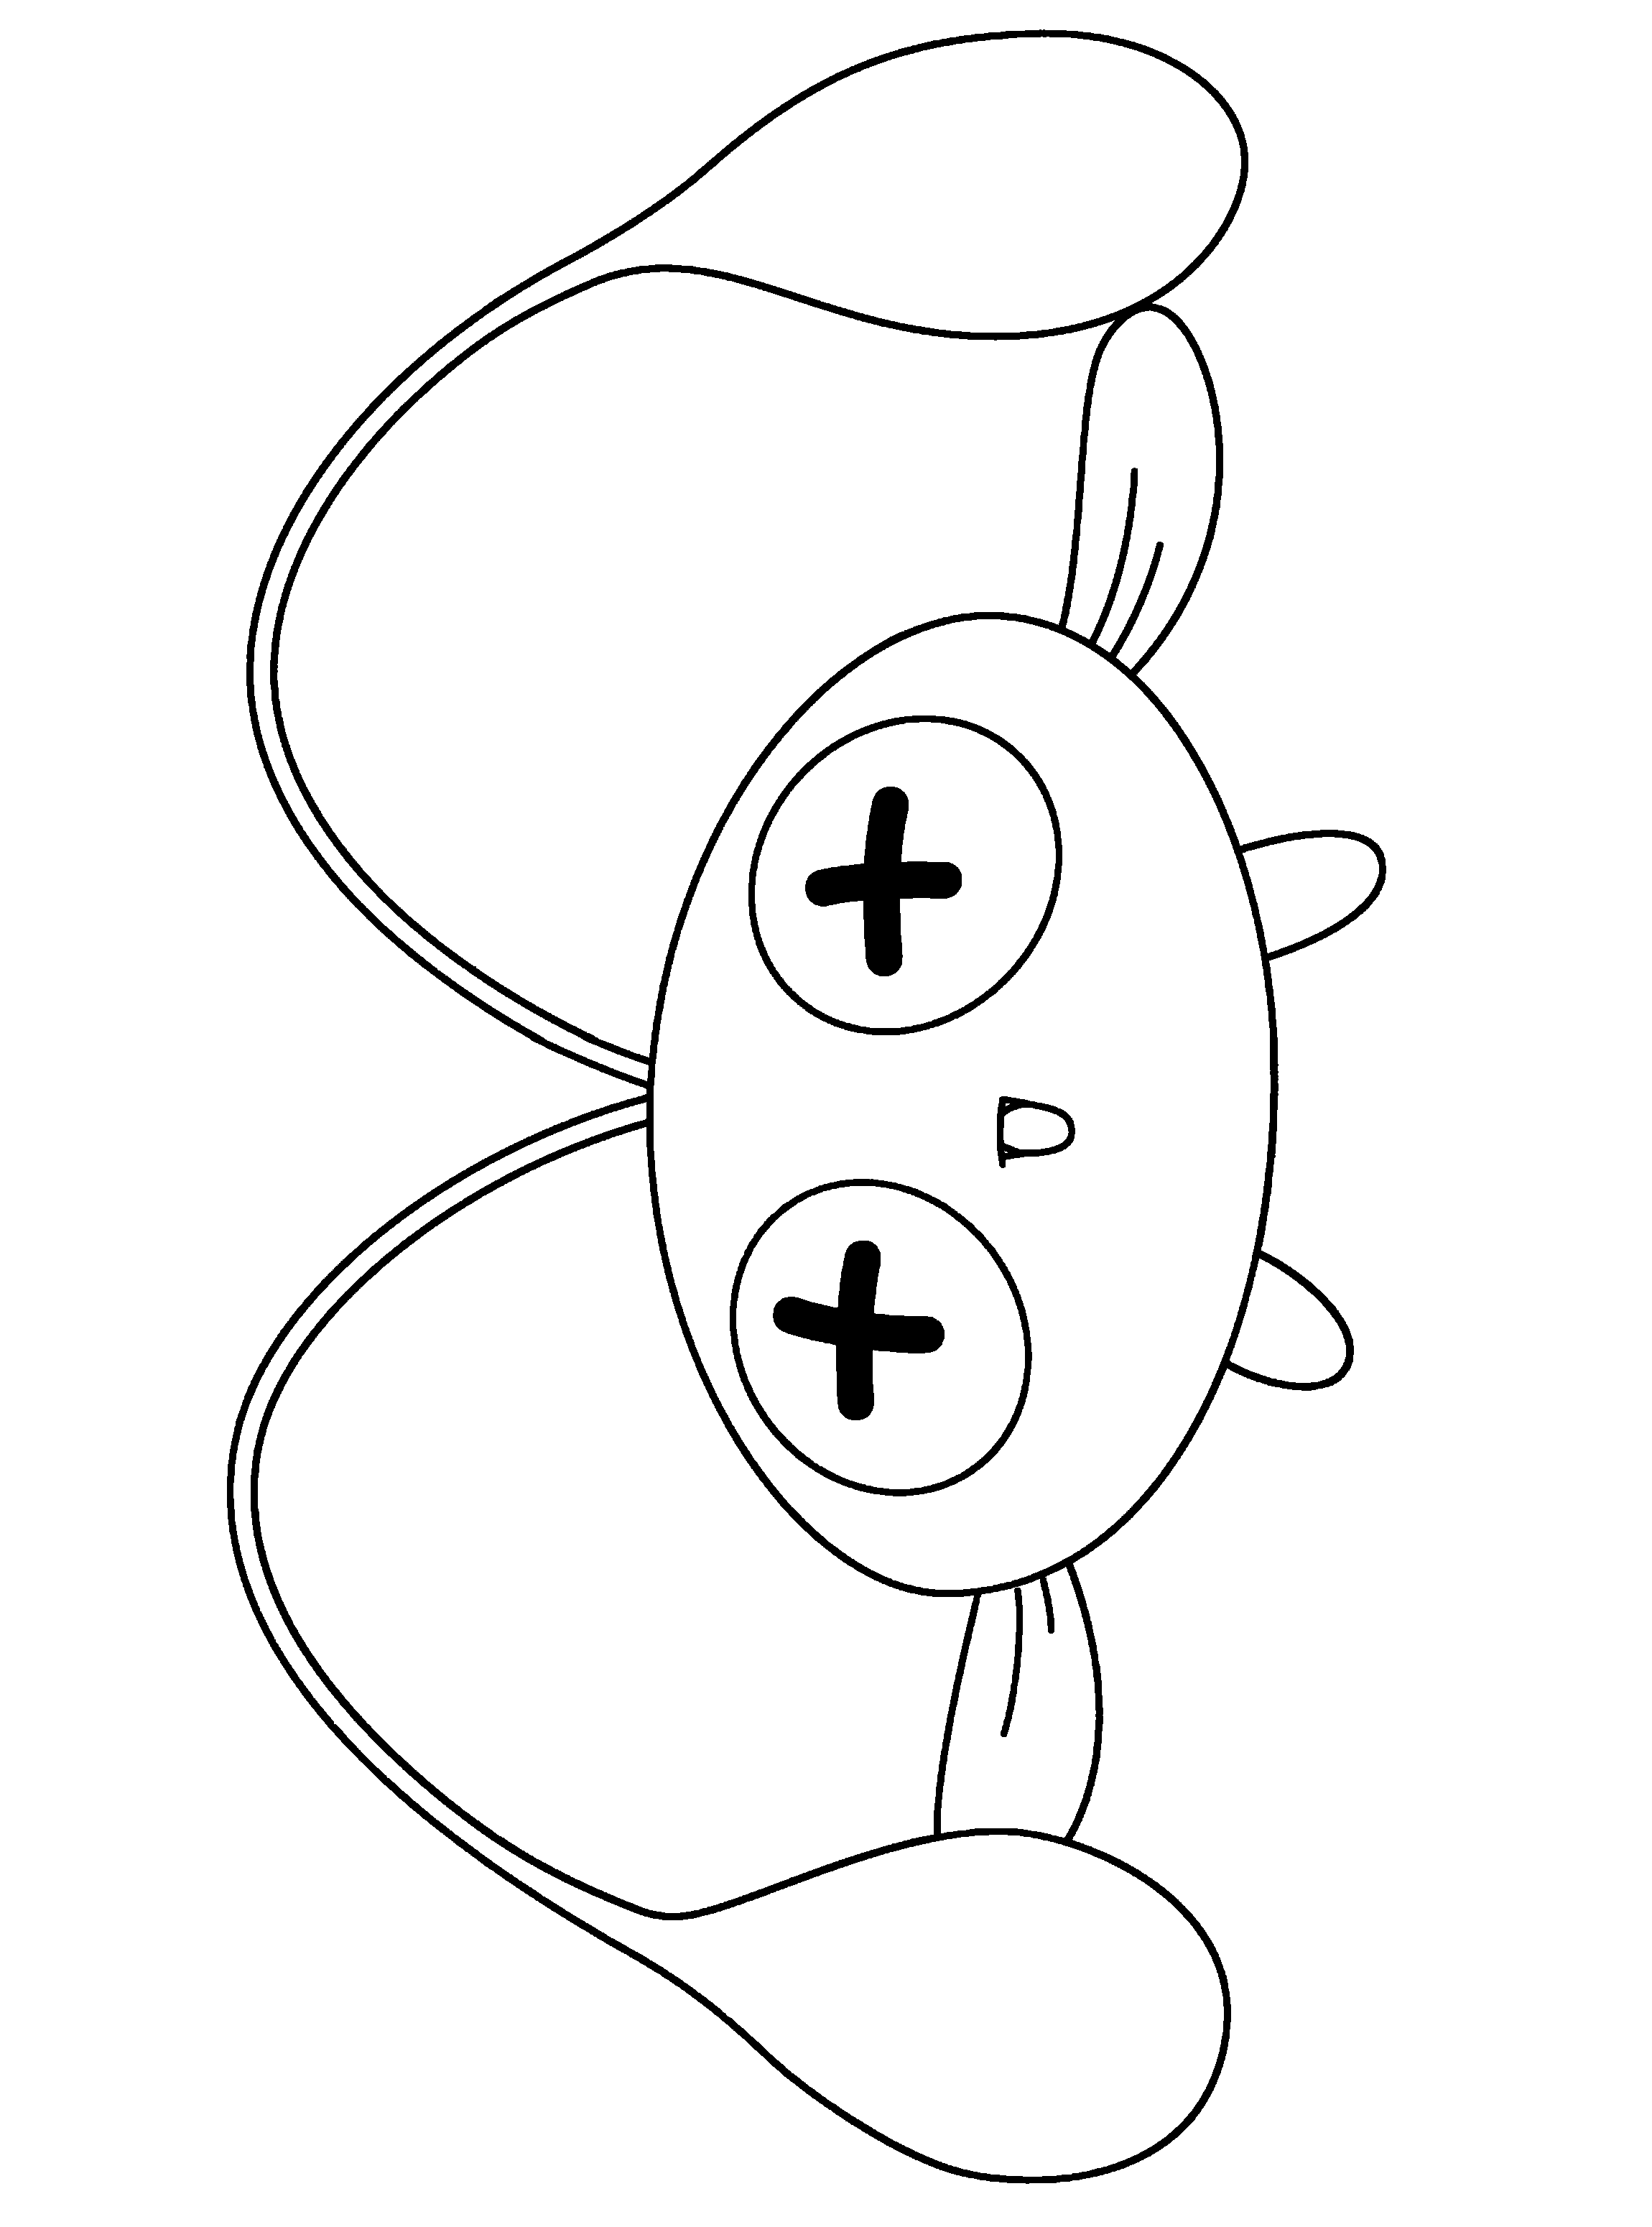 Pokemon coloring pages